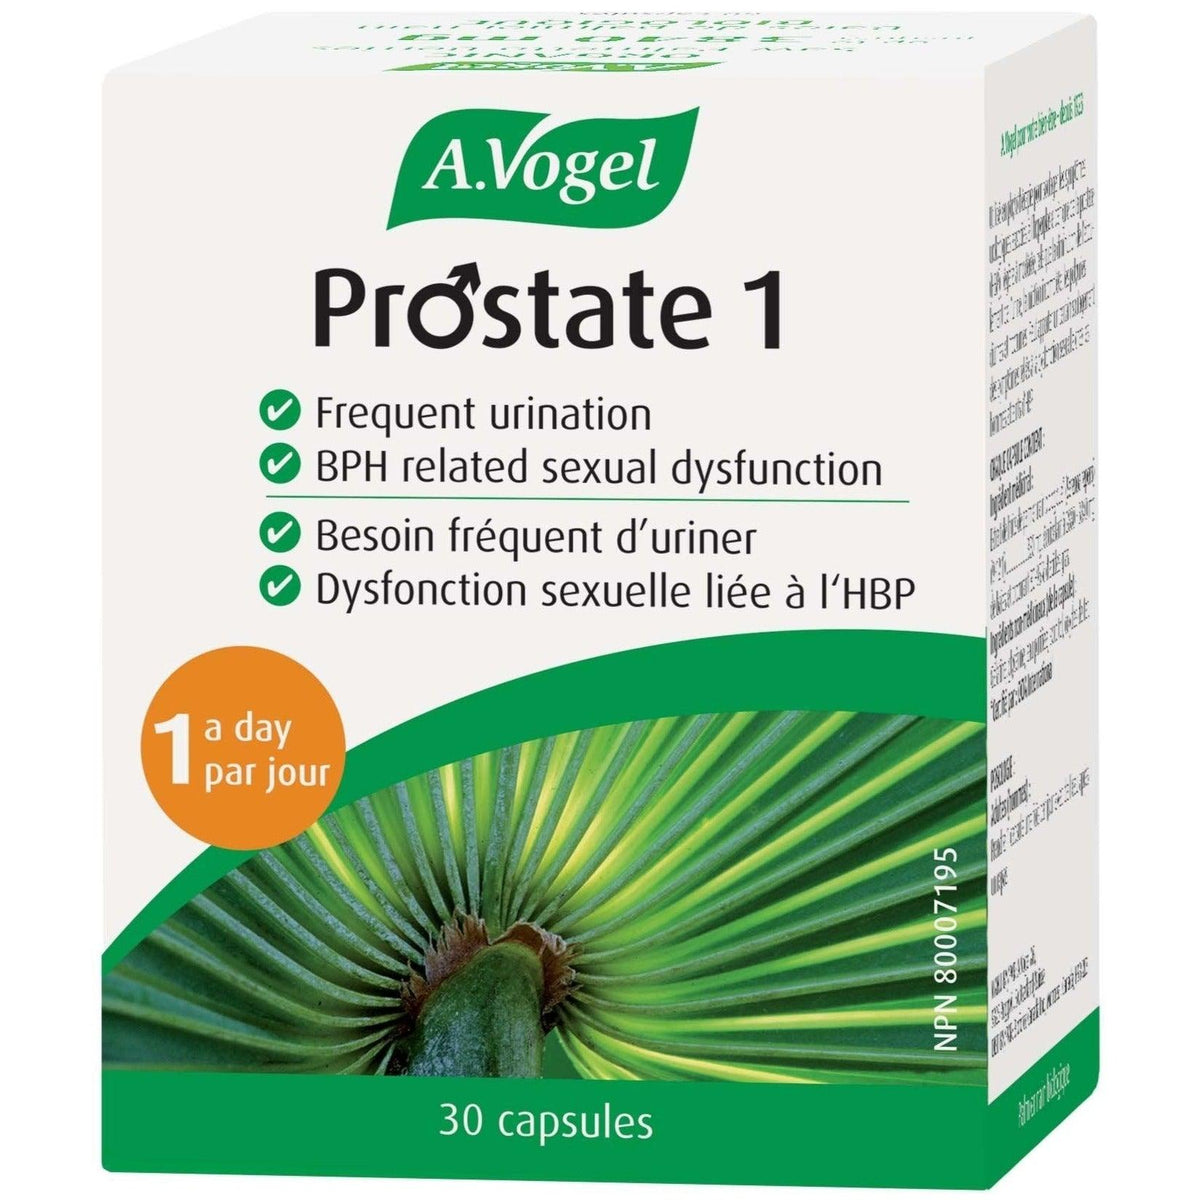 A. Vogel Prostate 1 30 Capsules Supplements - Prostate at Village Vitamin Store